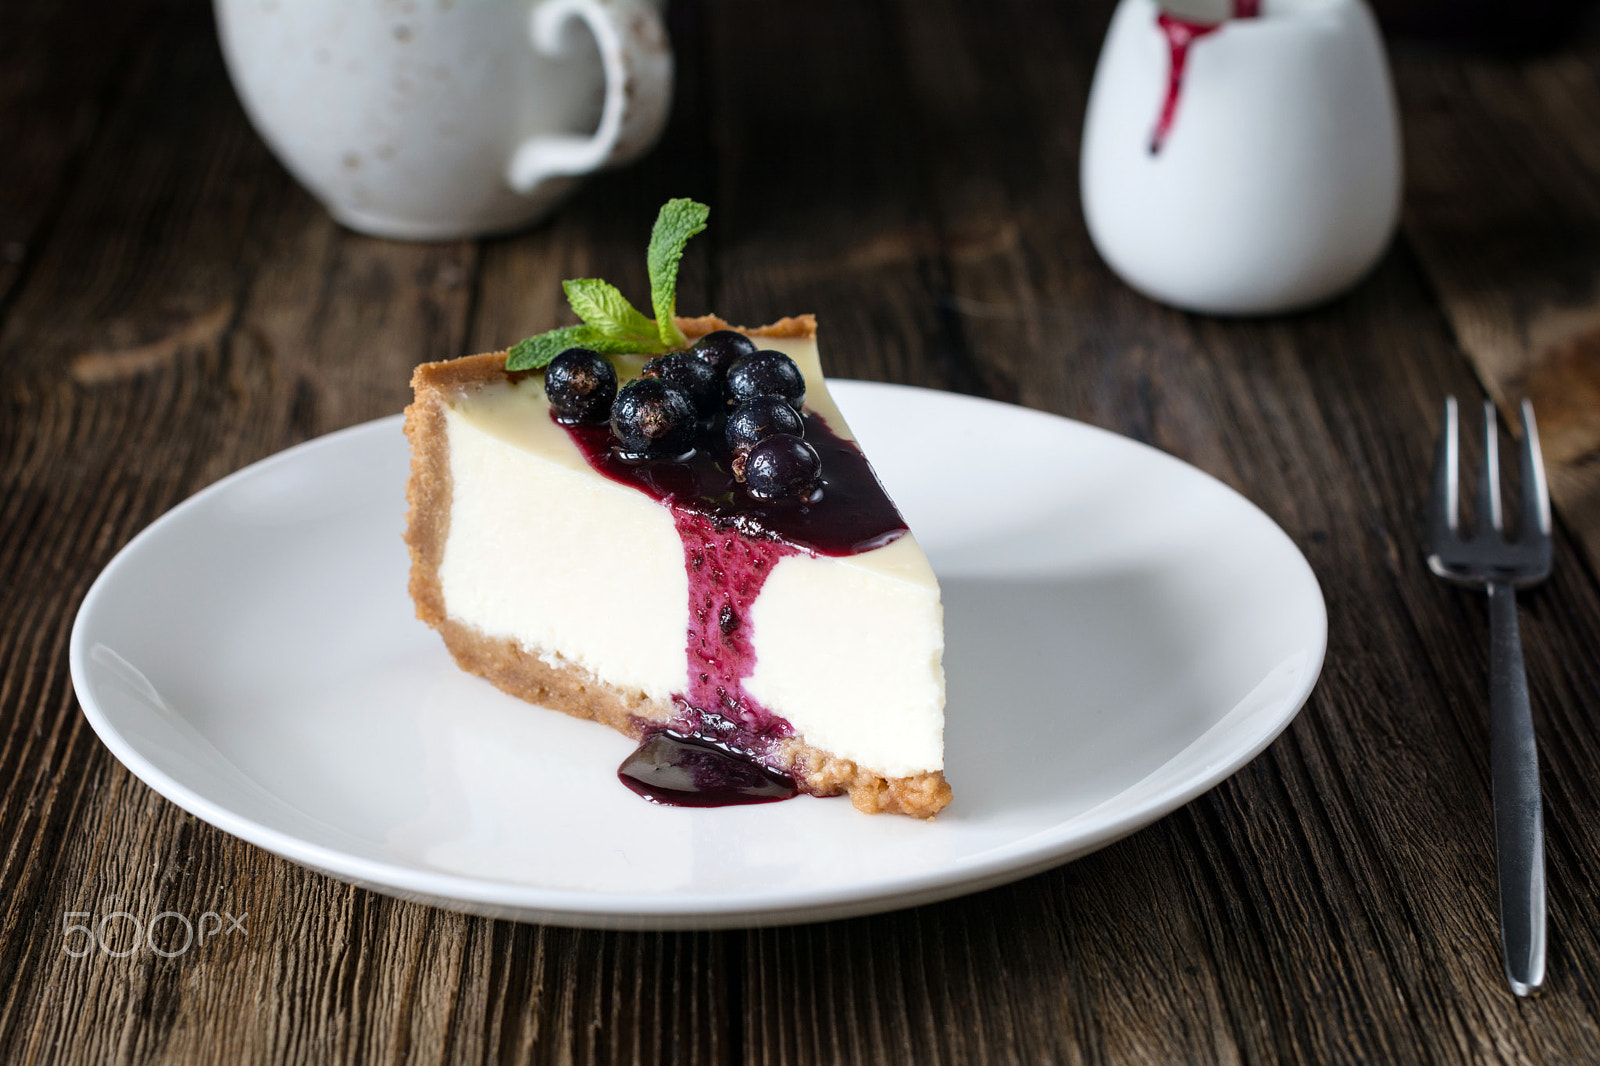 Nikon D7100 sample photo. Cheesecake with black currant sauce photography